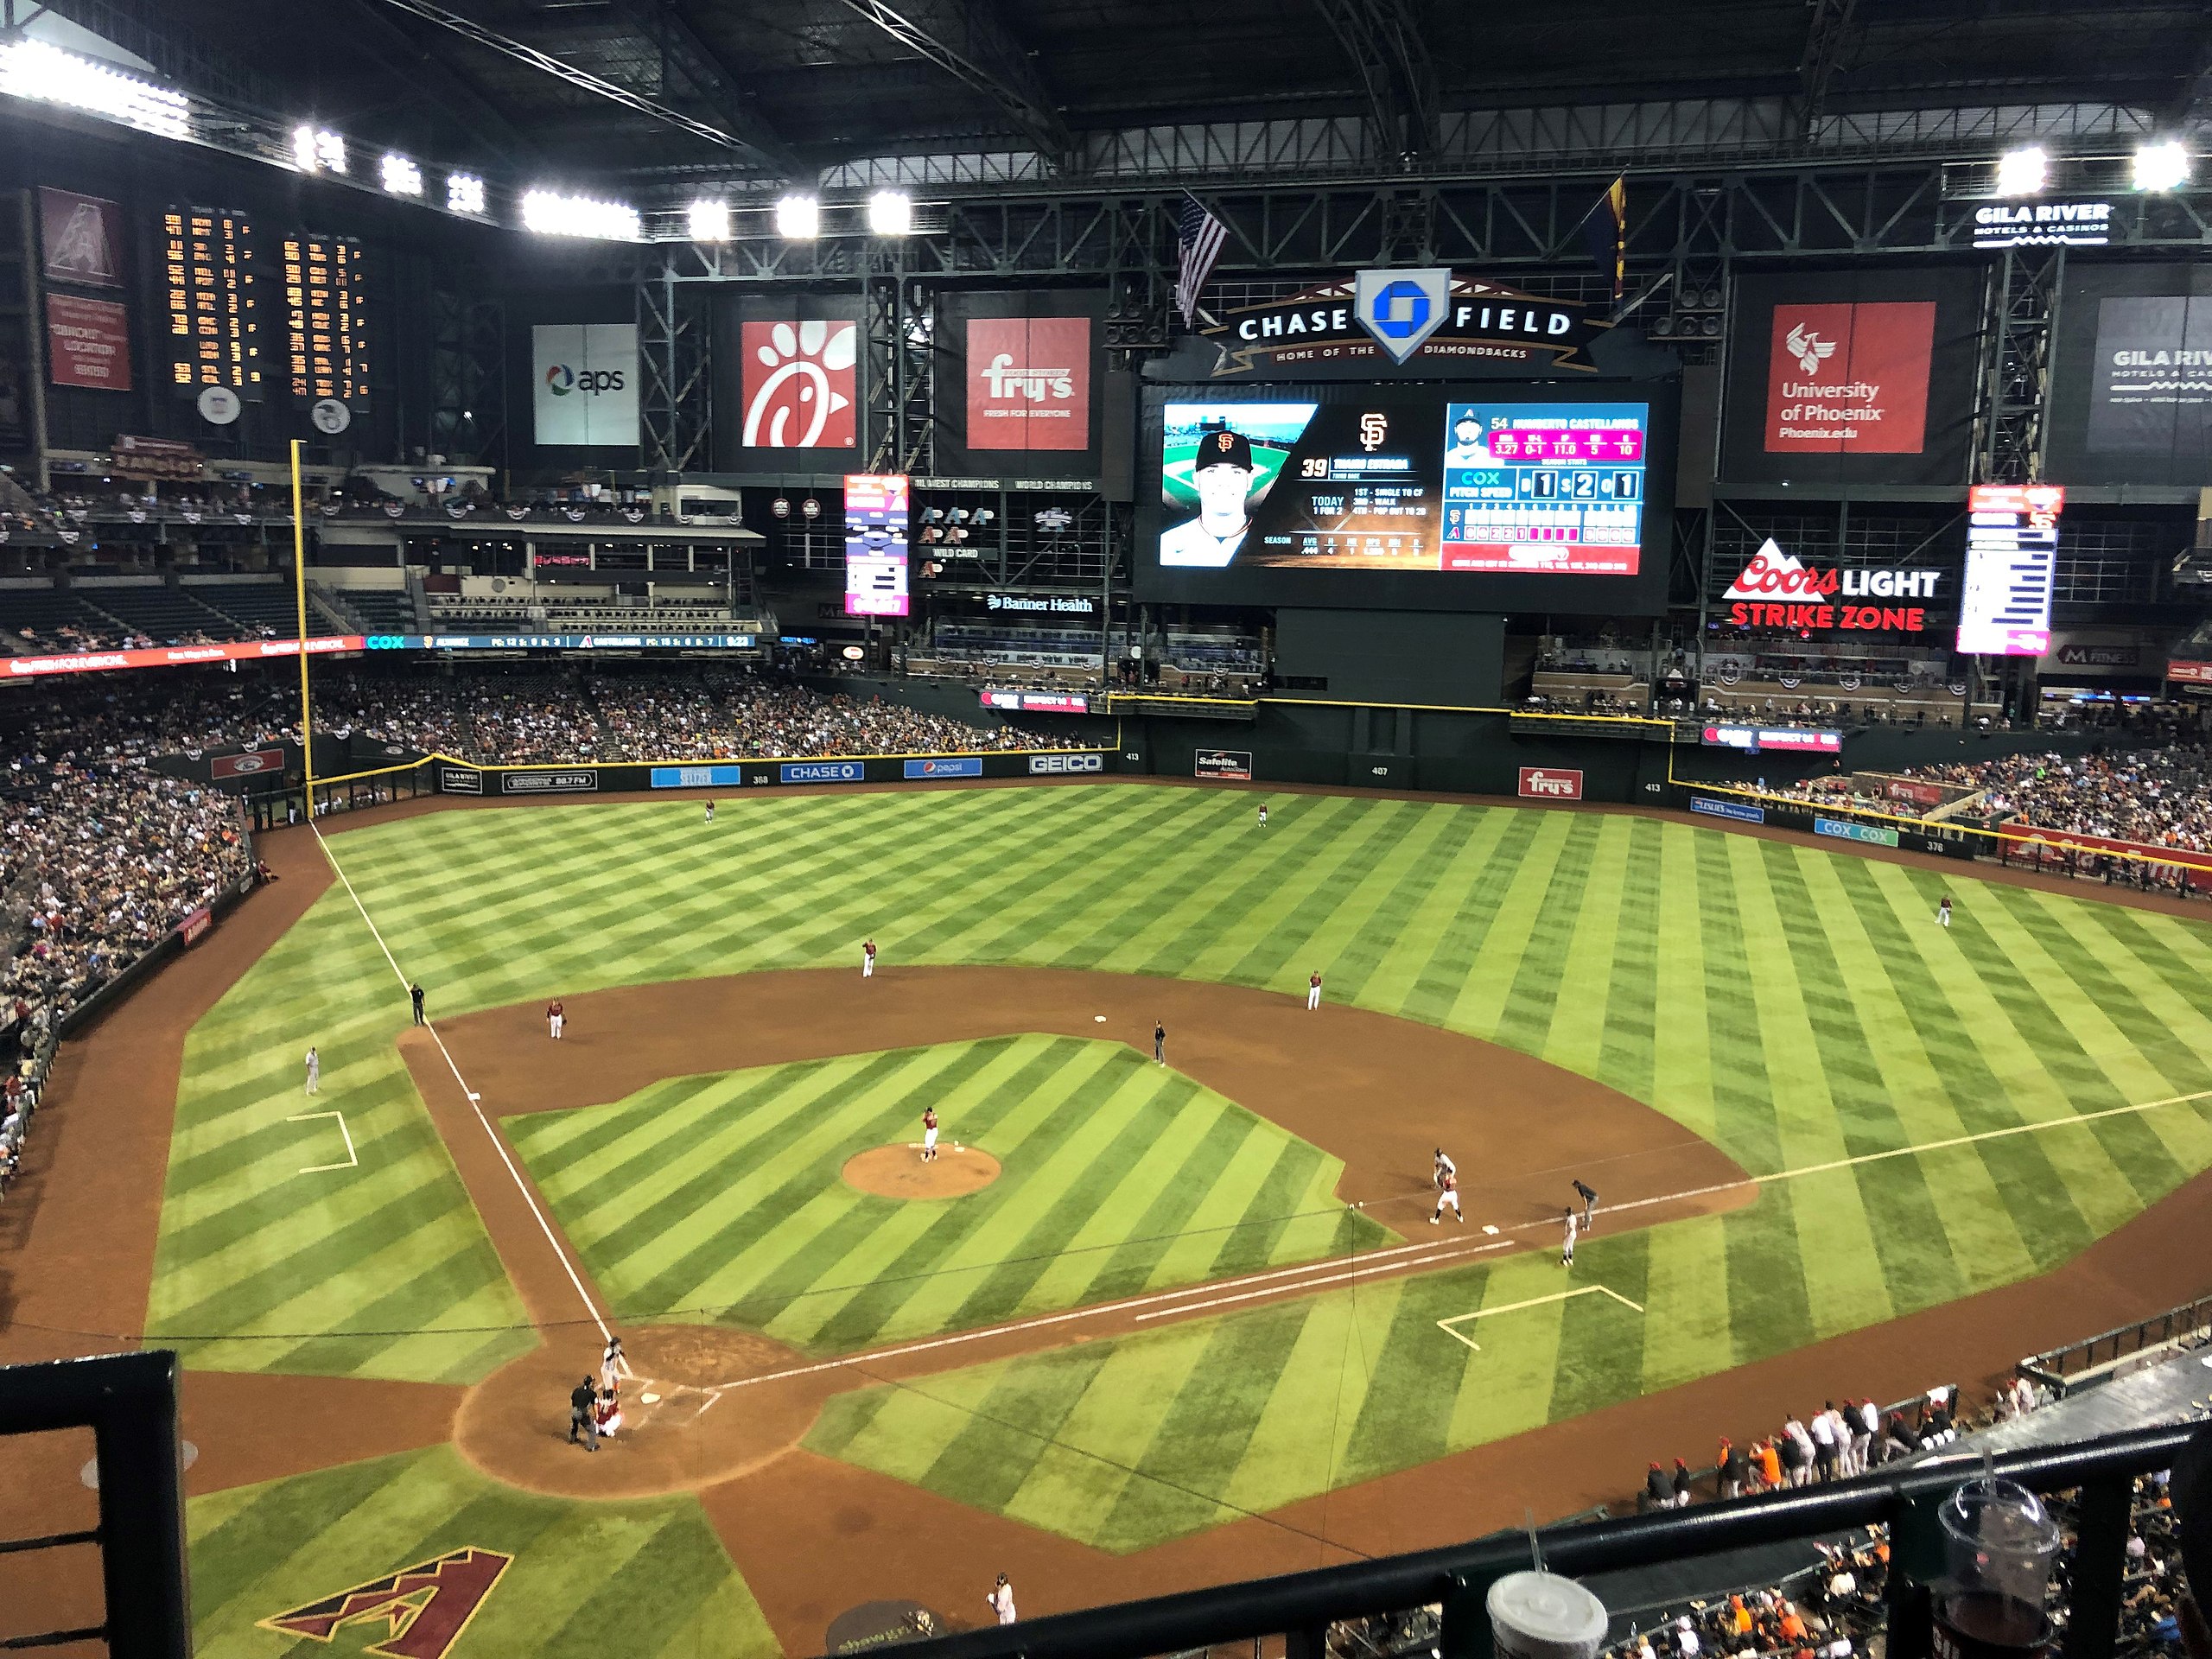 D-backs Games At Chase Field Are A Steal vs. Other MLB Teams